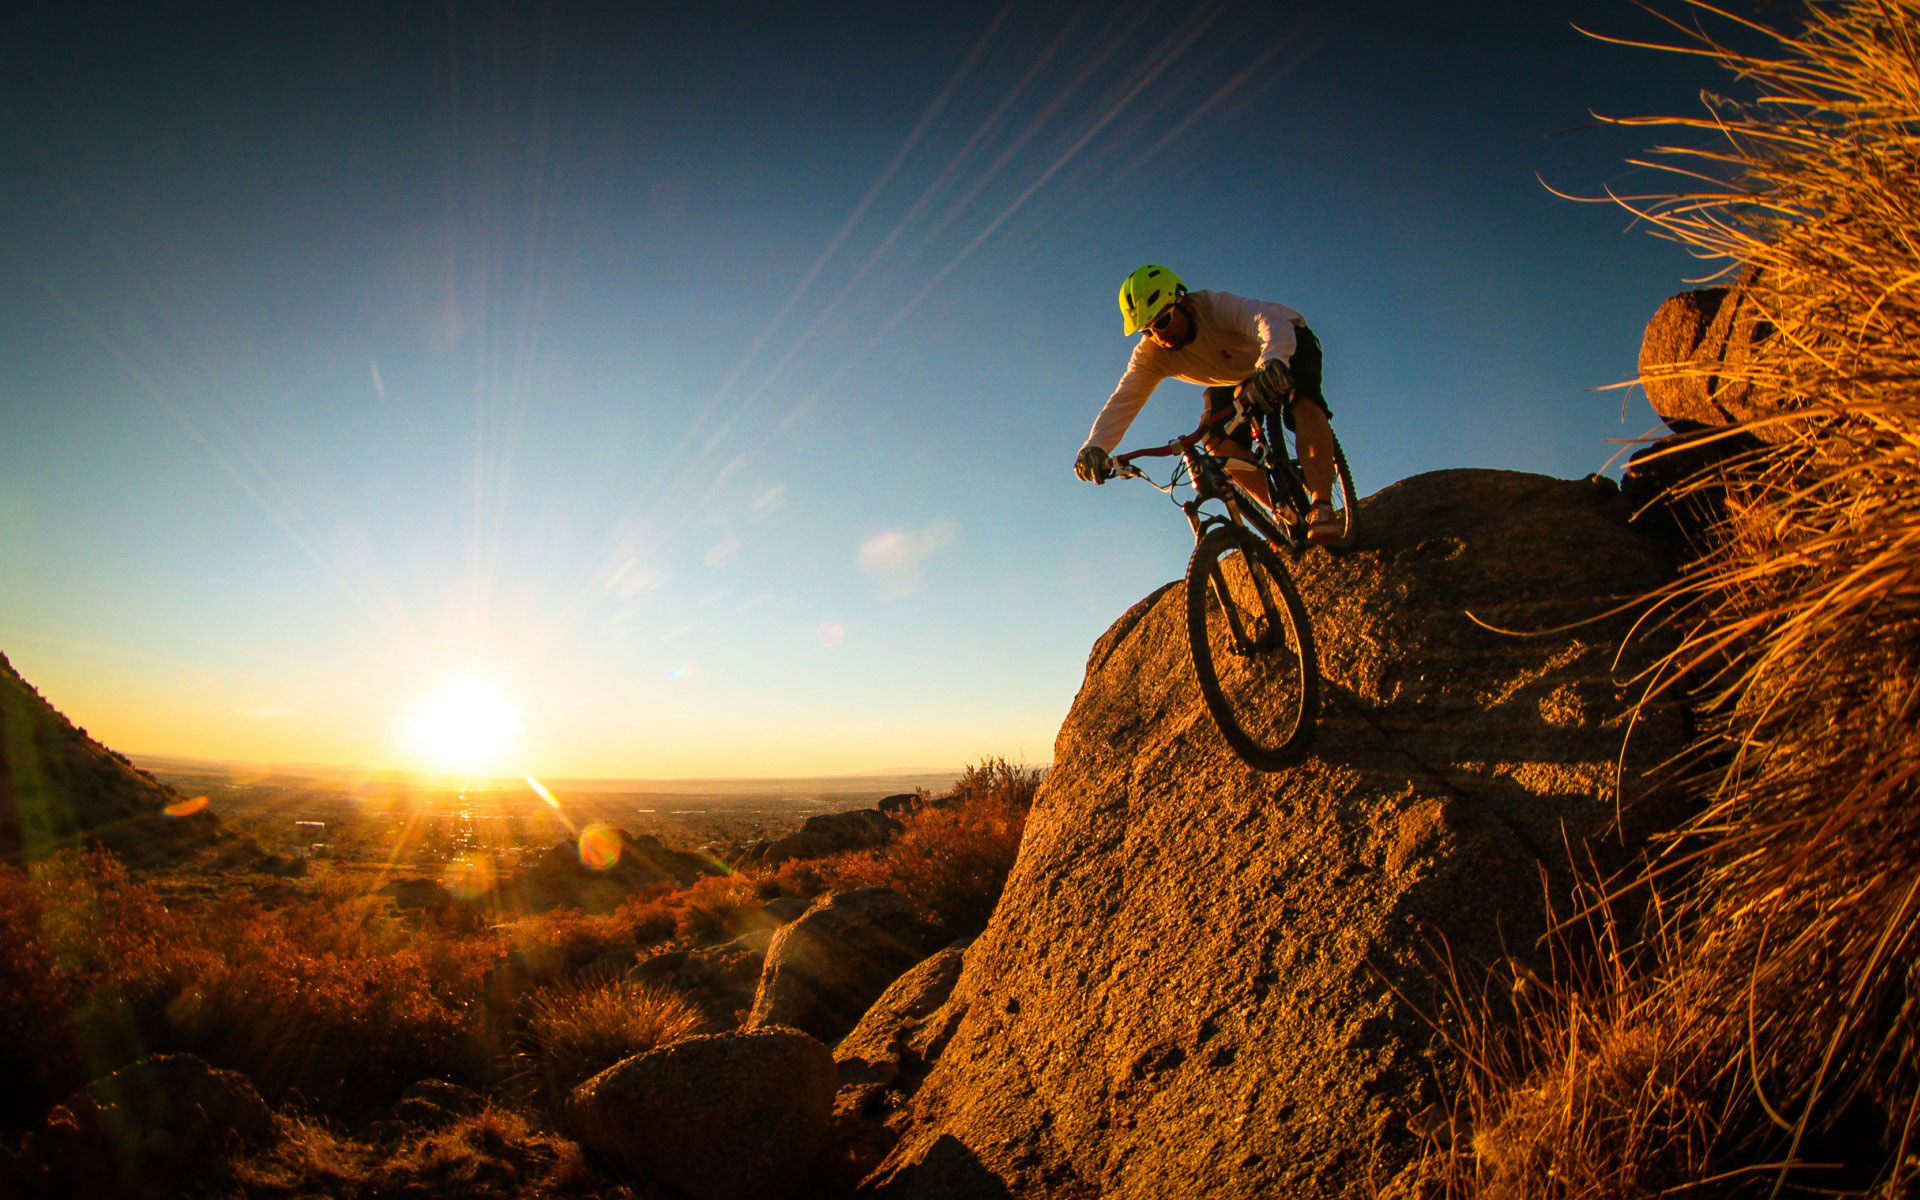 Cycling (Cycle Sport): Extreme Cycling In Mountains In California, Cycle Sport Equipment List: Helmet, Sunglasses, Mountain Bike. 1920x1200 HD Wallpaper.